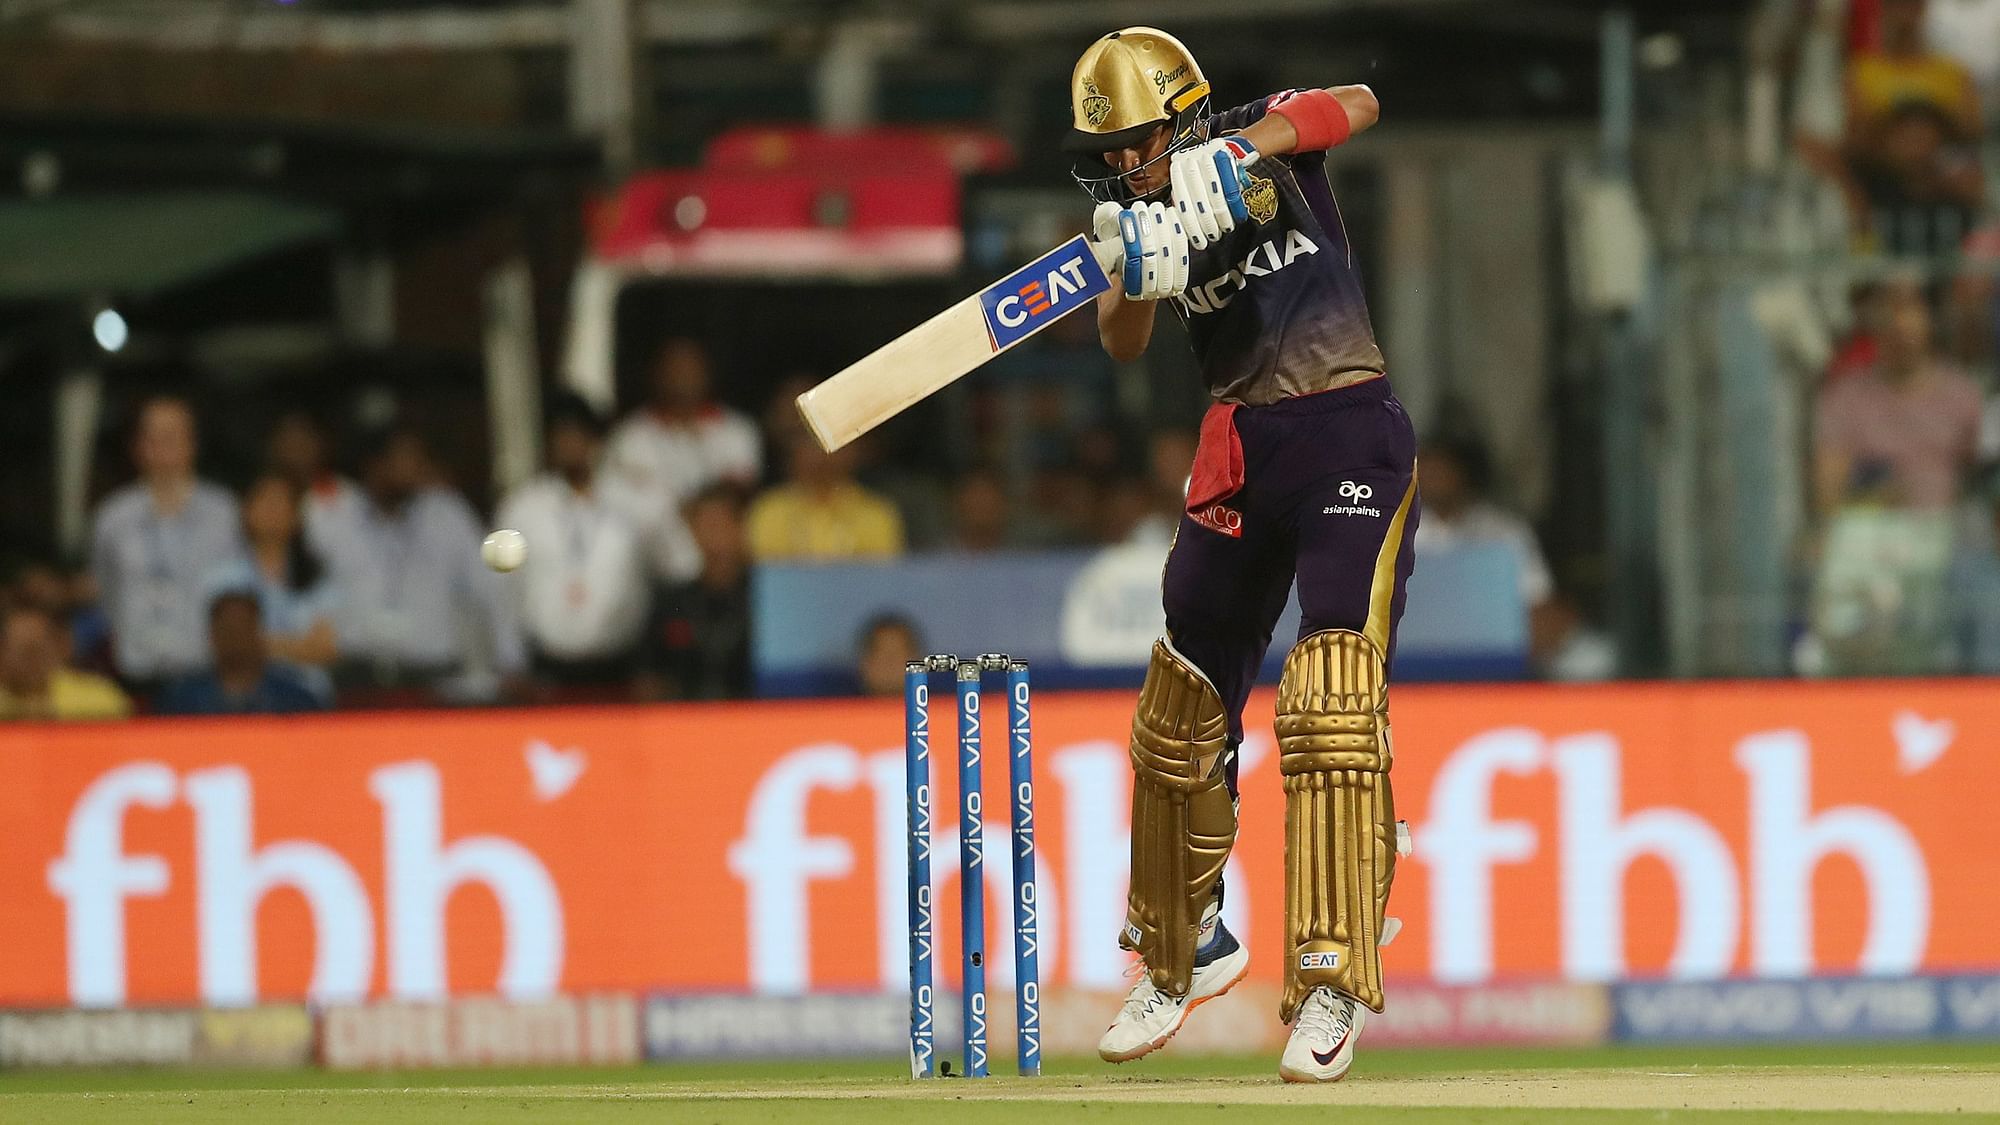 Gill played his best innings of the 2019 IPL, scoring 76 off 45 balls and getting KKR off to a flyer.